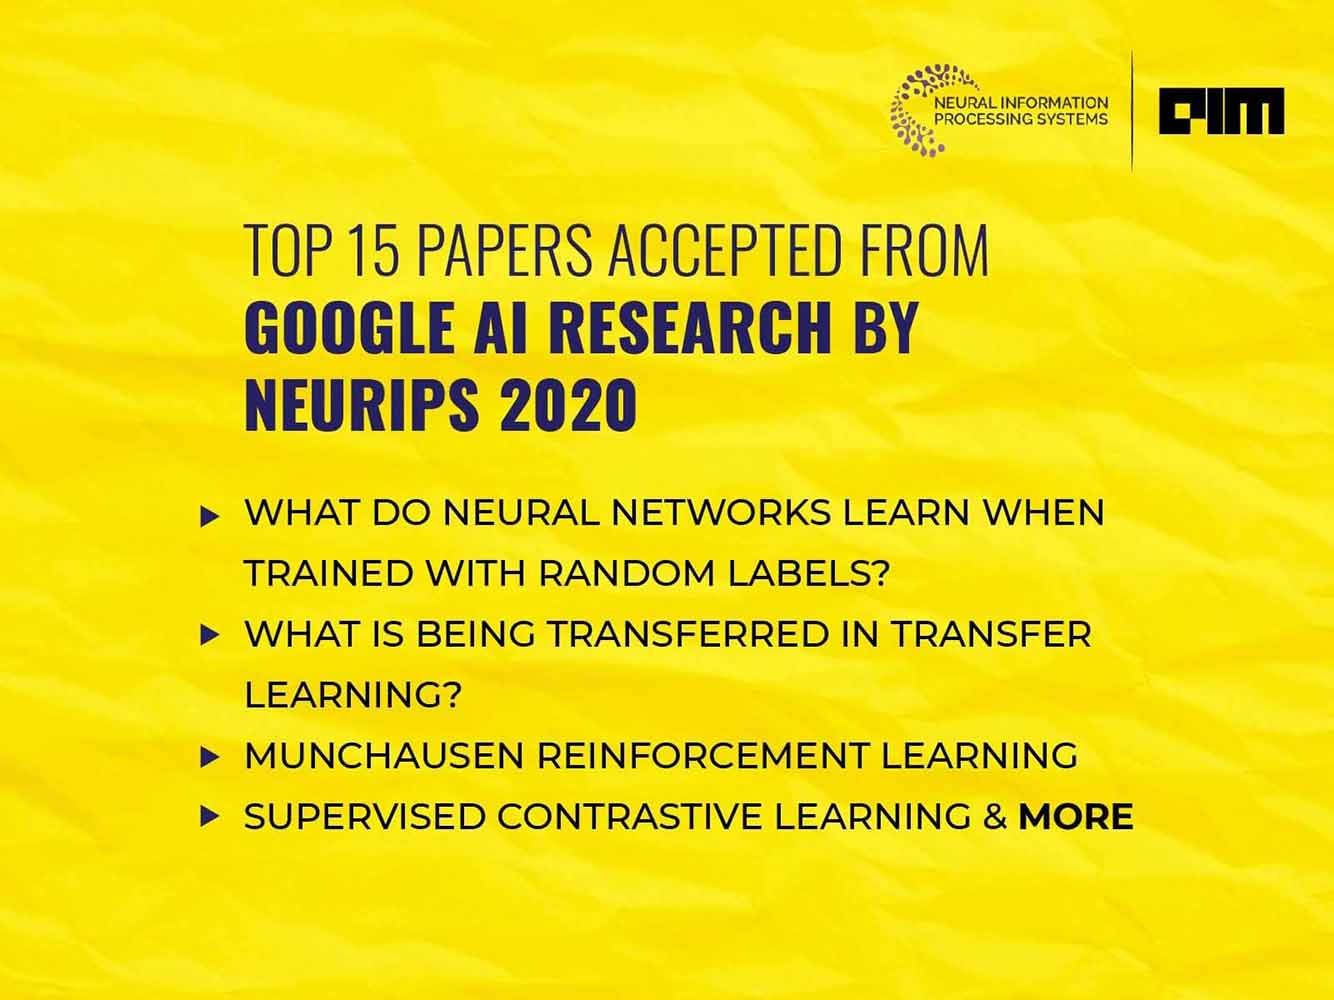 Top 15 Papers From Google AI Research Accepted By NeurIPS 2020